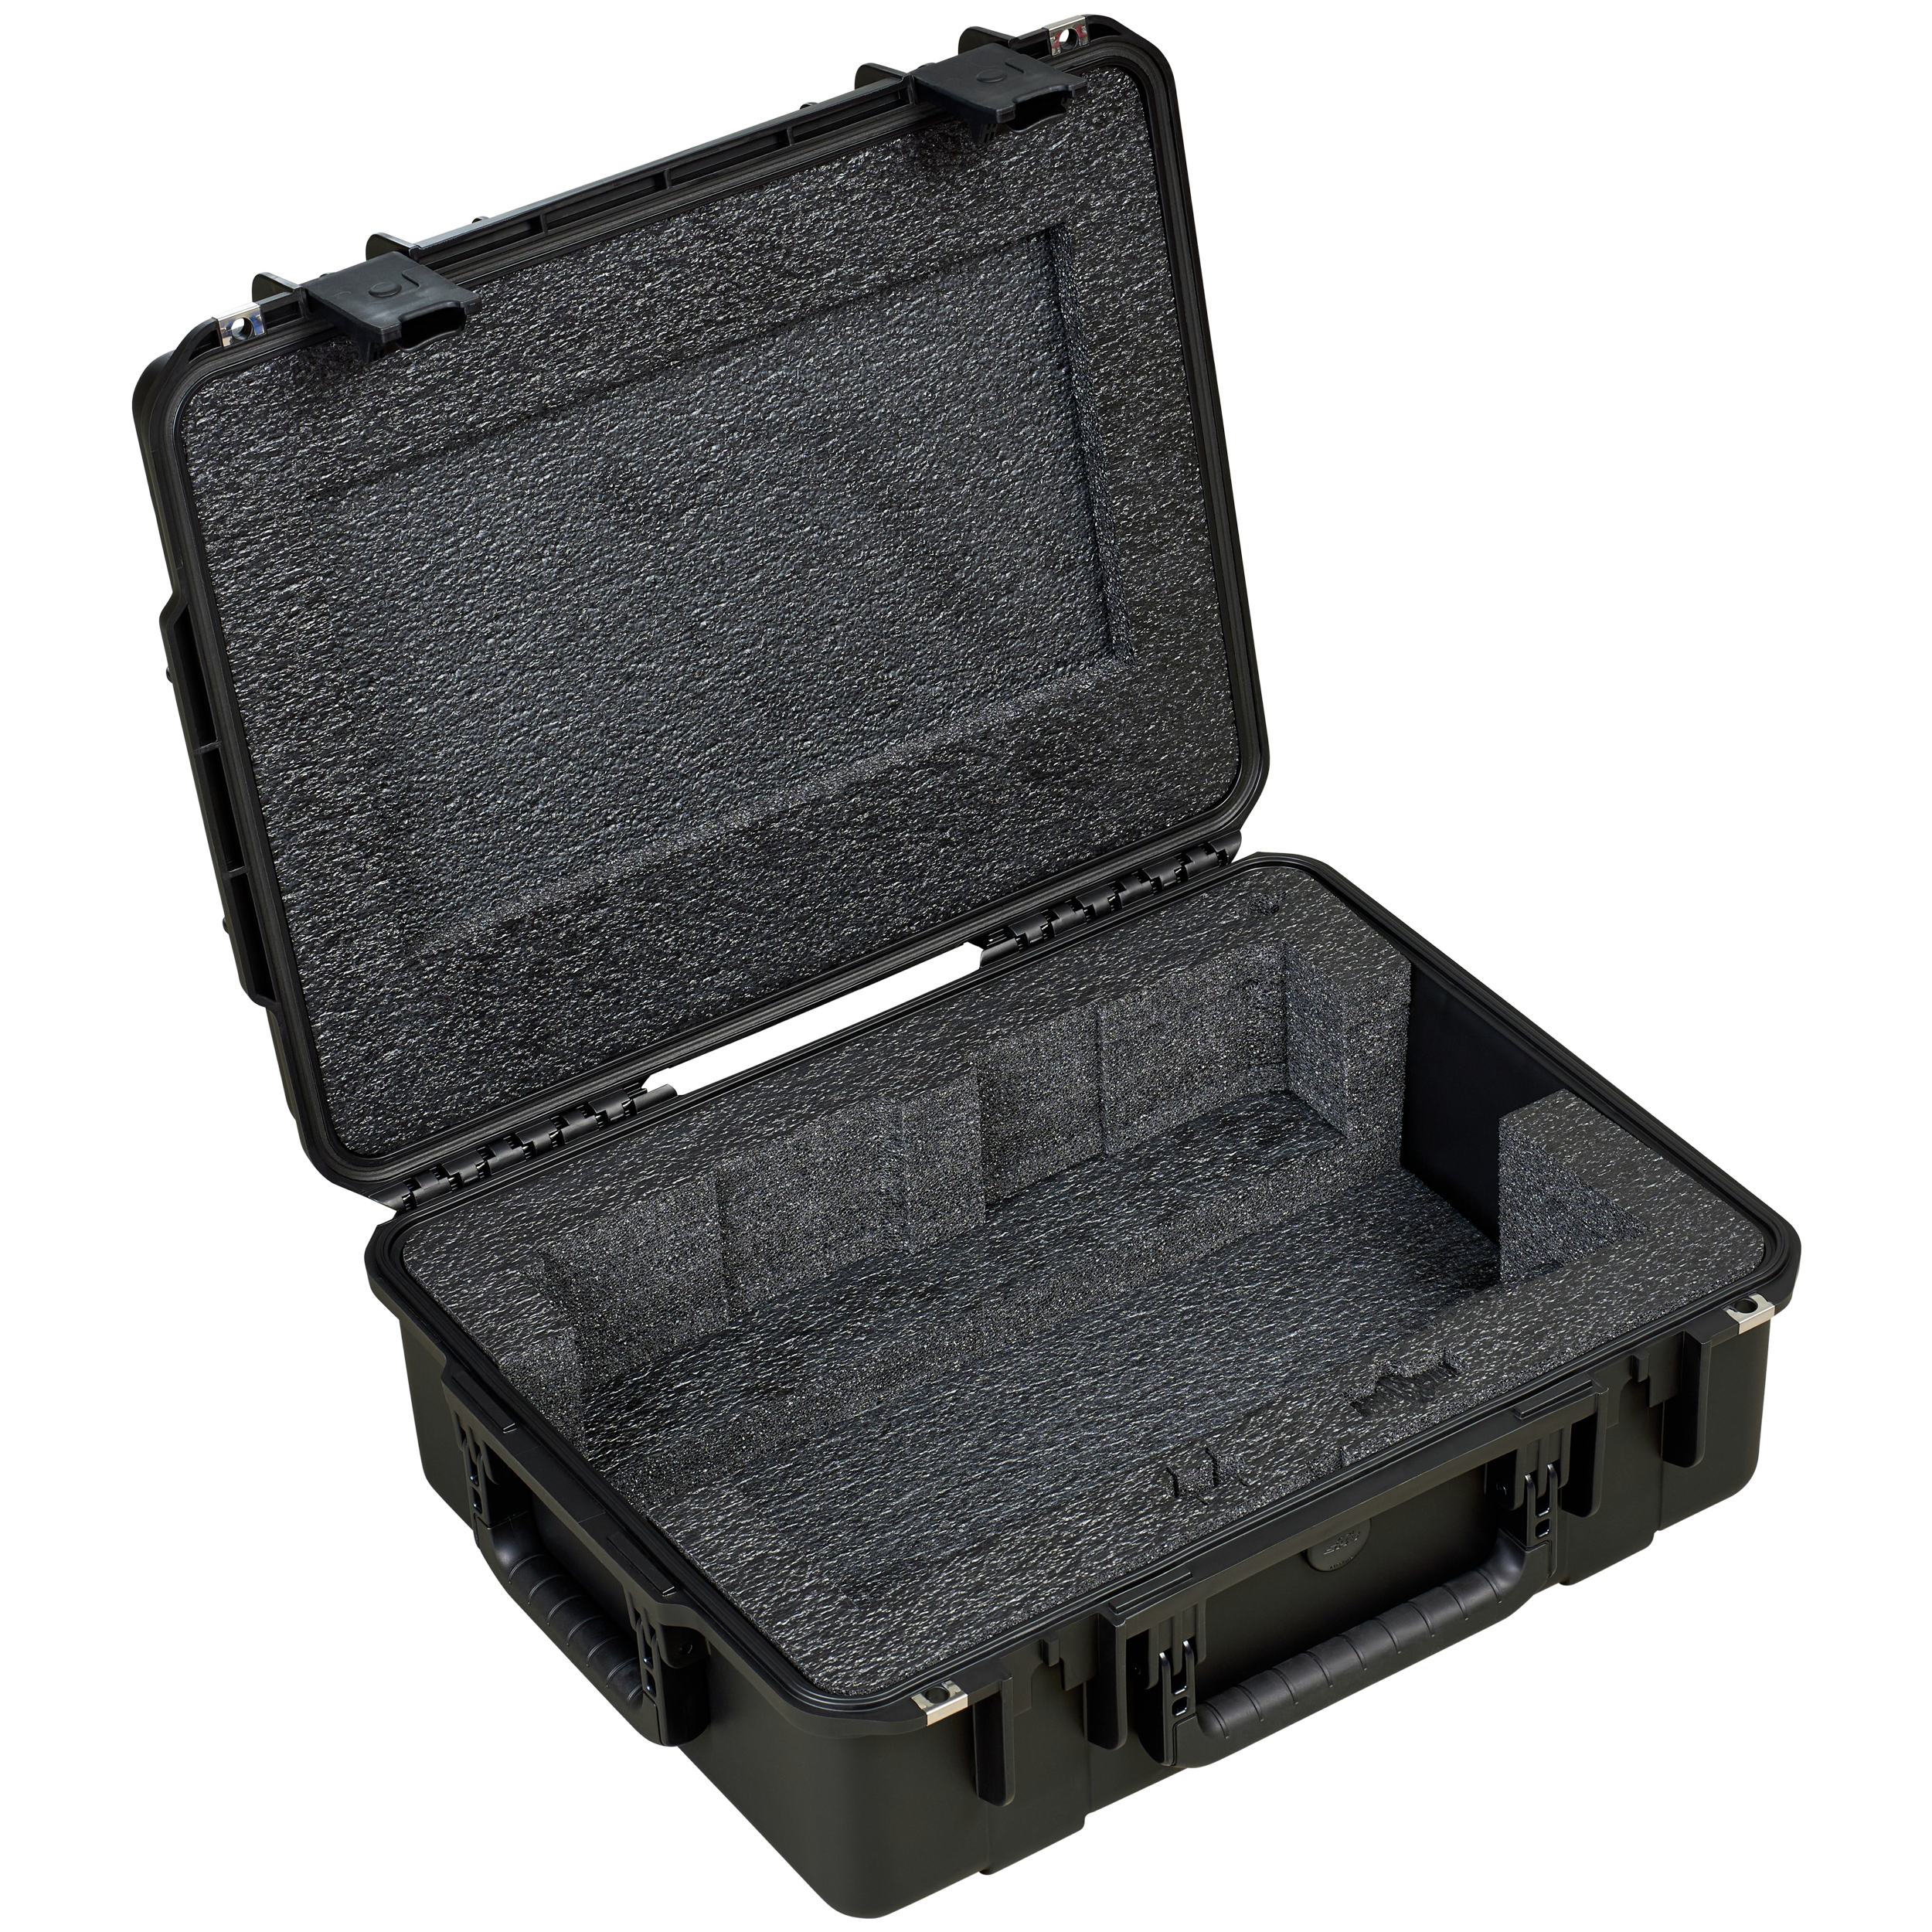 BYFP ipCase for Roland VR-120HD